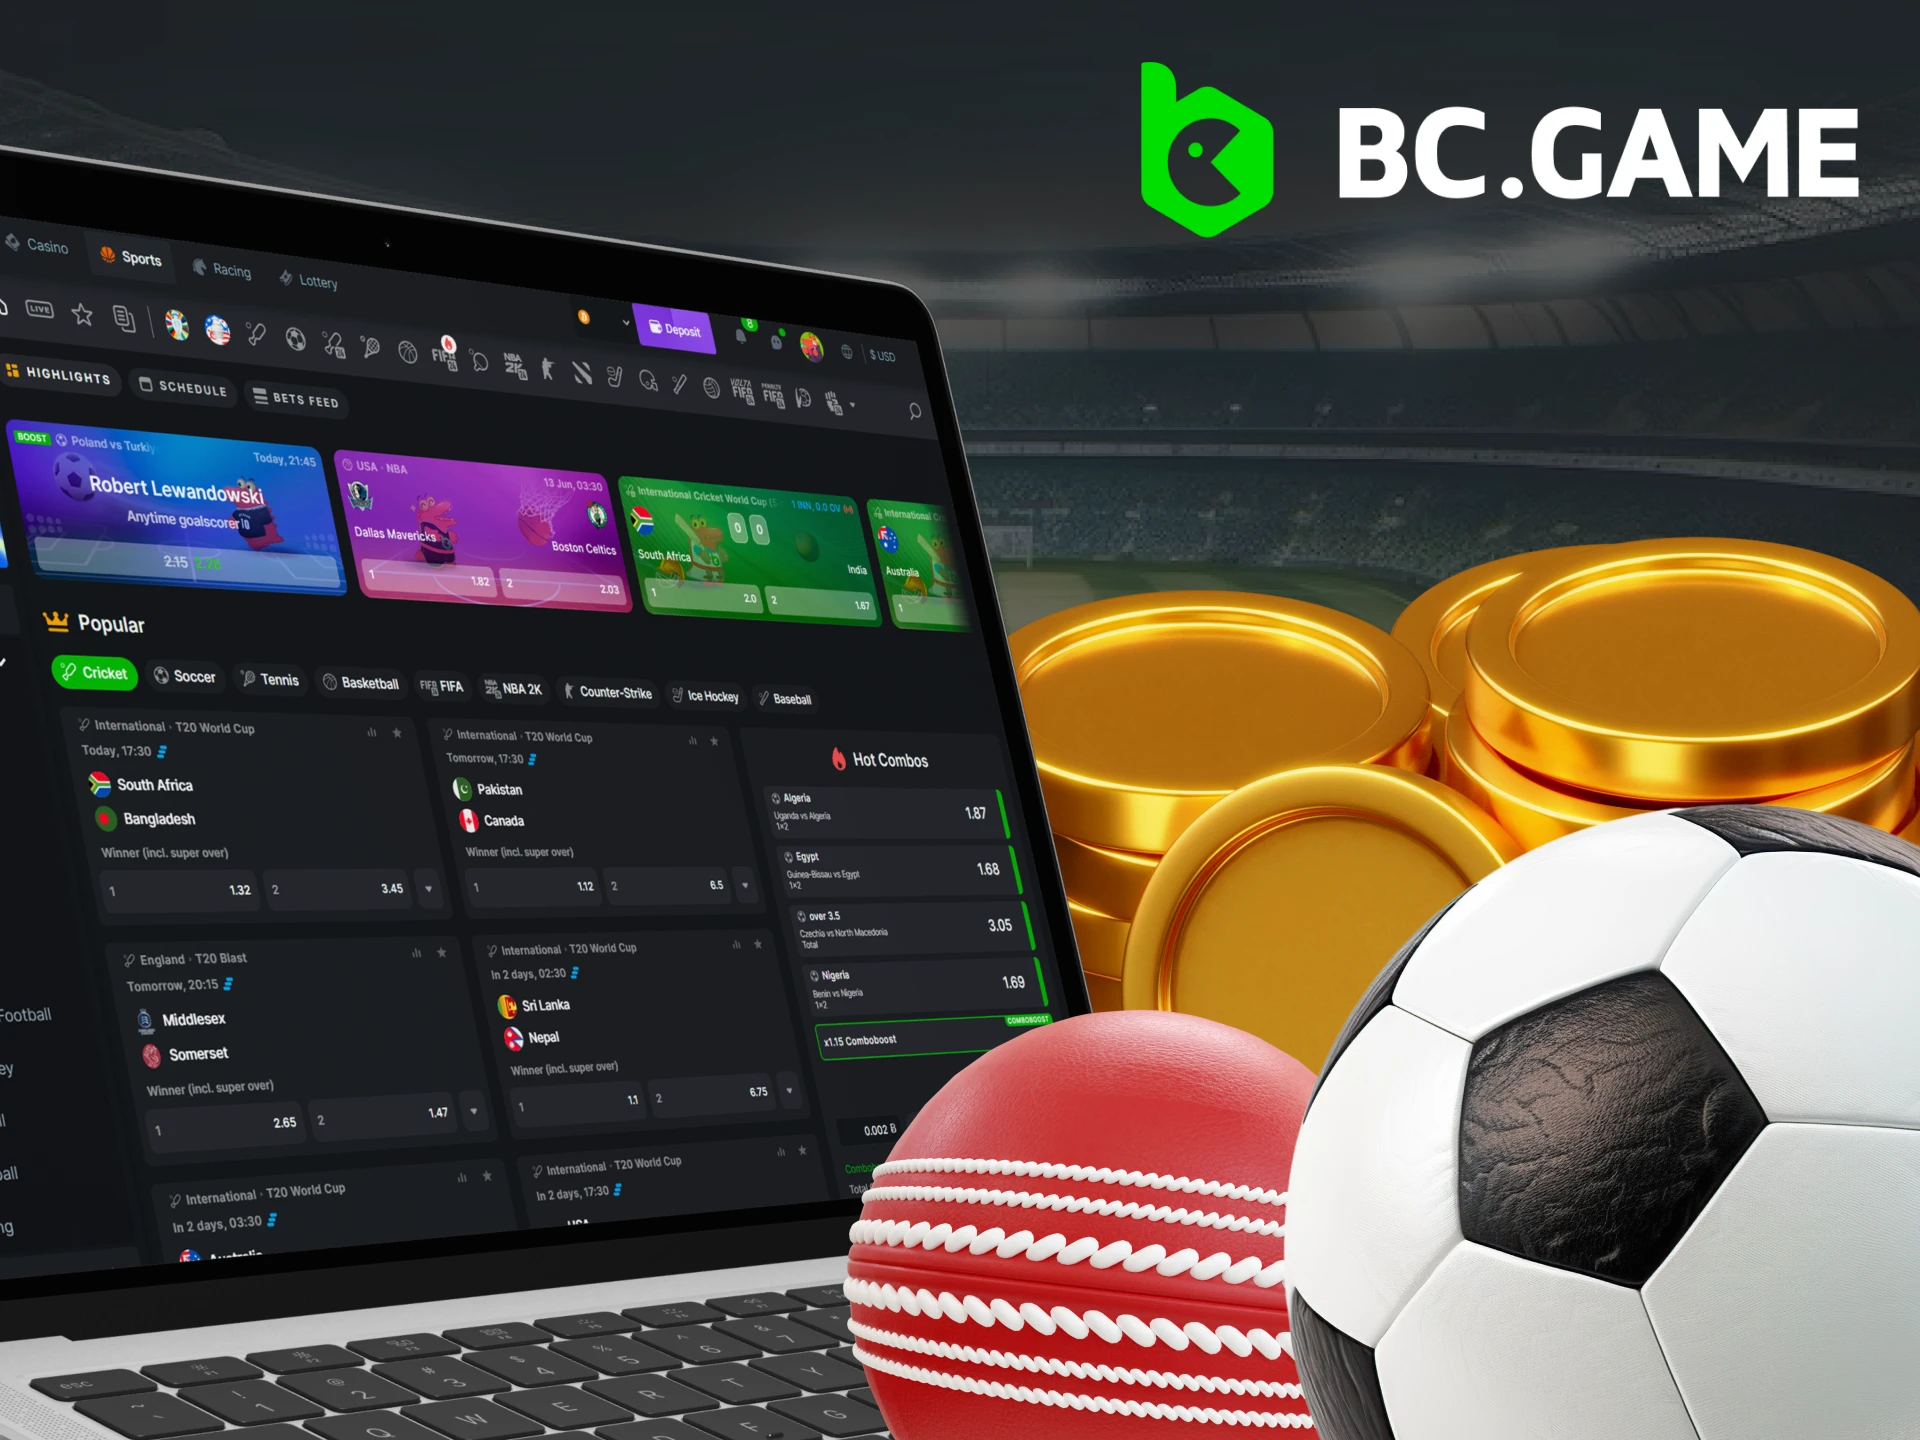 Login or register with BC Game to start betting on sports.